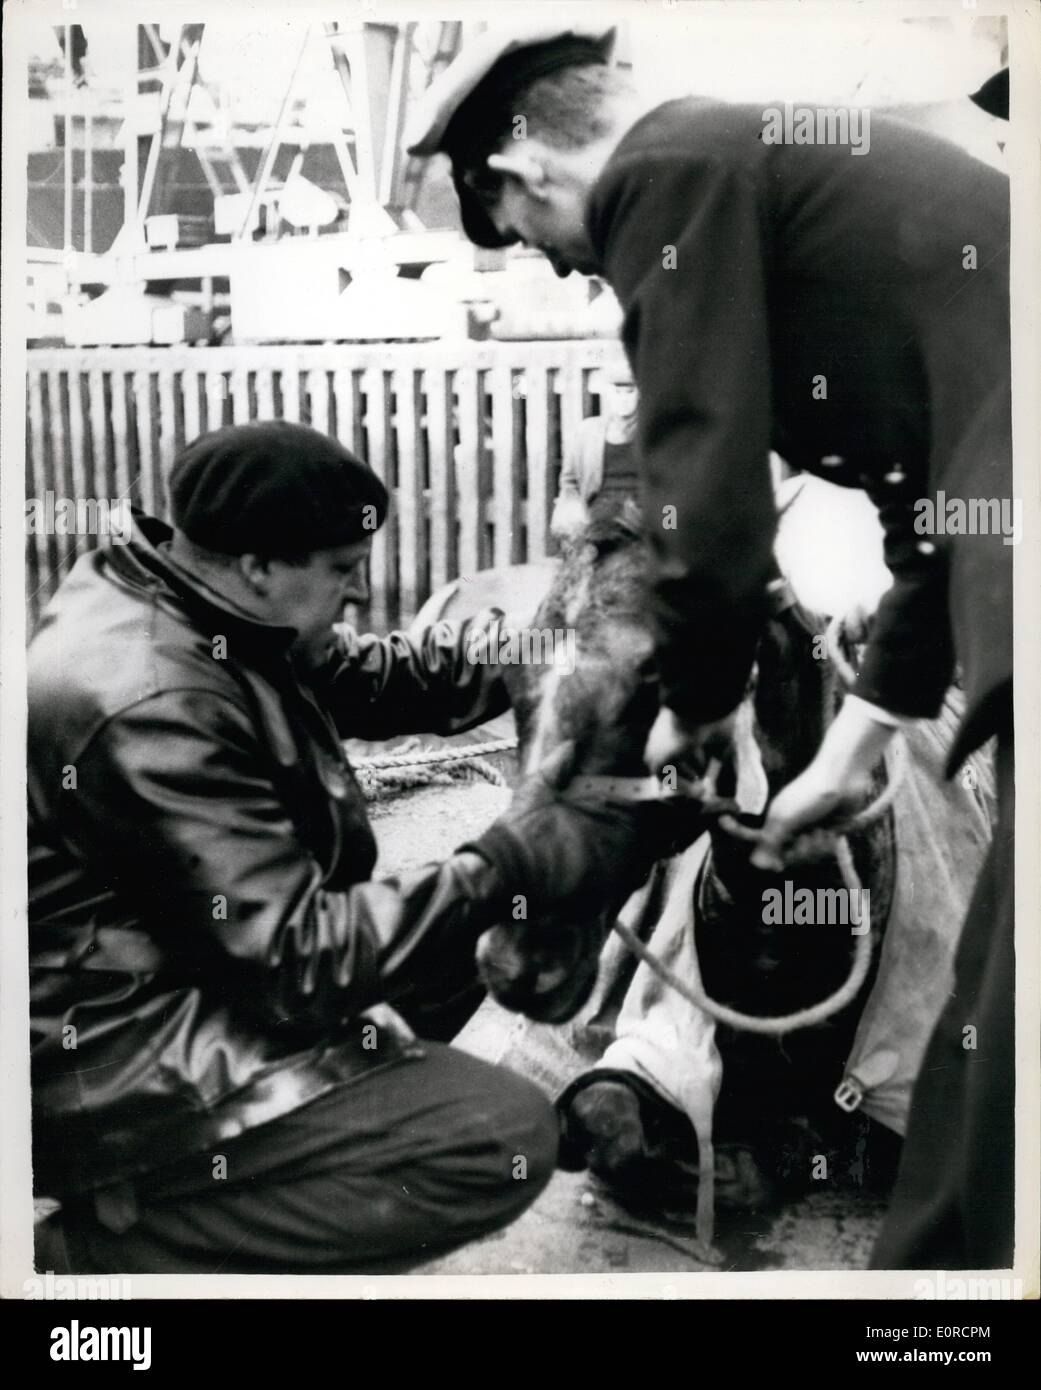 Dec. 12, 1958 - Thoroughbred racehorse takes a ducking. Accident while loading at London docks. ''Atonement'' a thoroughbred racehorse was boin gowung a board the cargo liner ''Surat'' bound for Malaya today - when the cable enapped - and it plunged into the King George V Dock. Within a few minutes the two yer old geding was lifted out - and apart from a few grazes appeared to be none the worse of its ducking. The gelding was owned and trained by Mr. Peter Thrale at Epsom. The animal was sent back to its stables in middlesex - and will be shipped again later Stock Photo